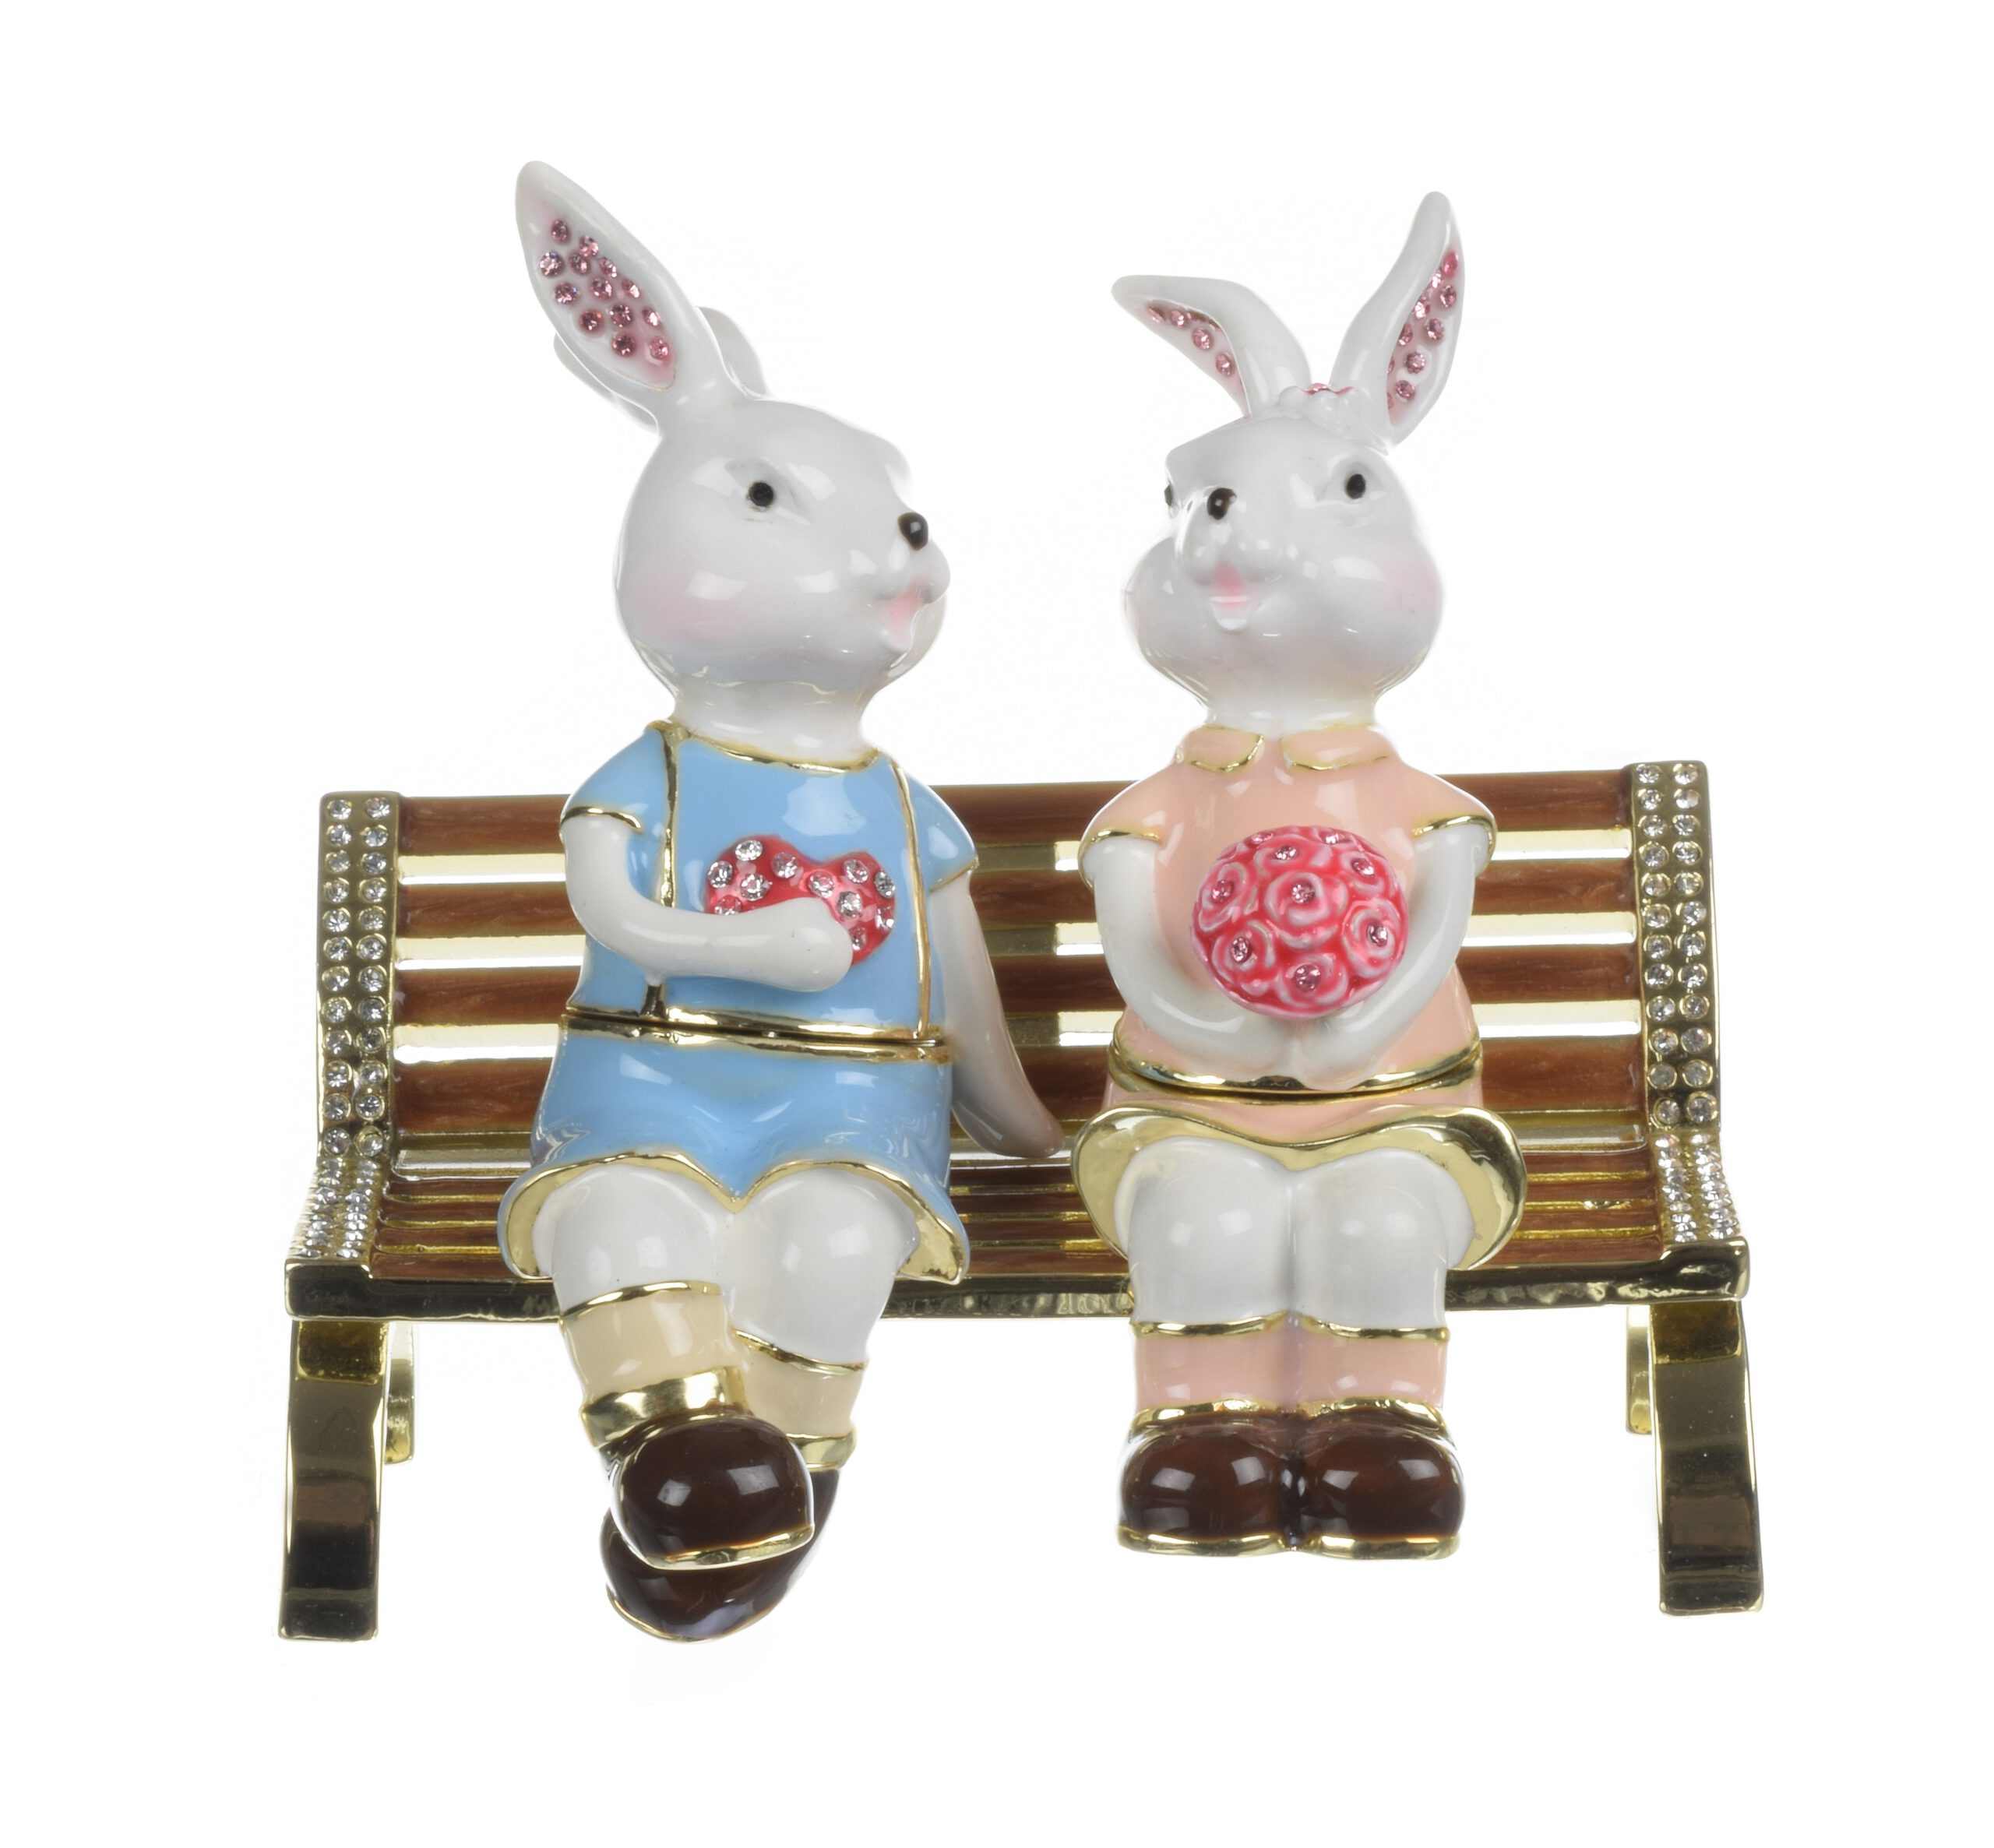 Bunnies Sitting on a Bench